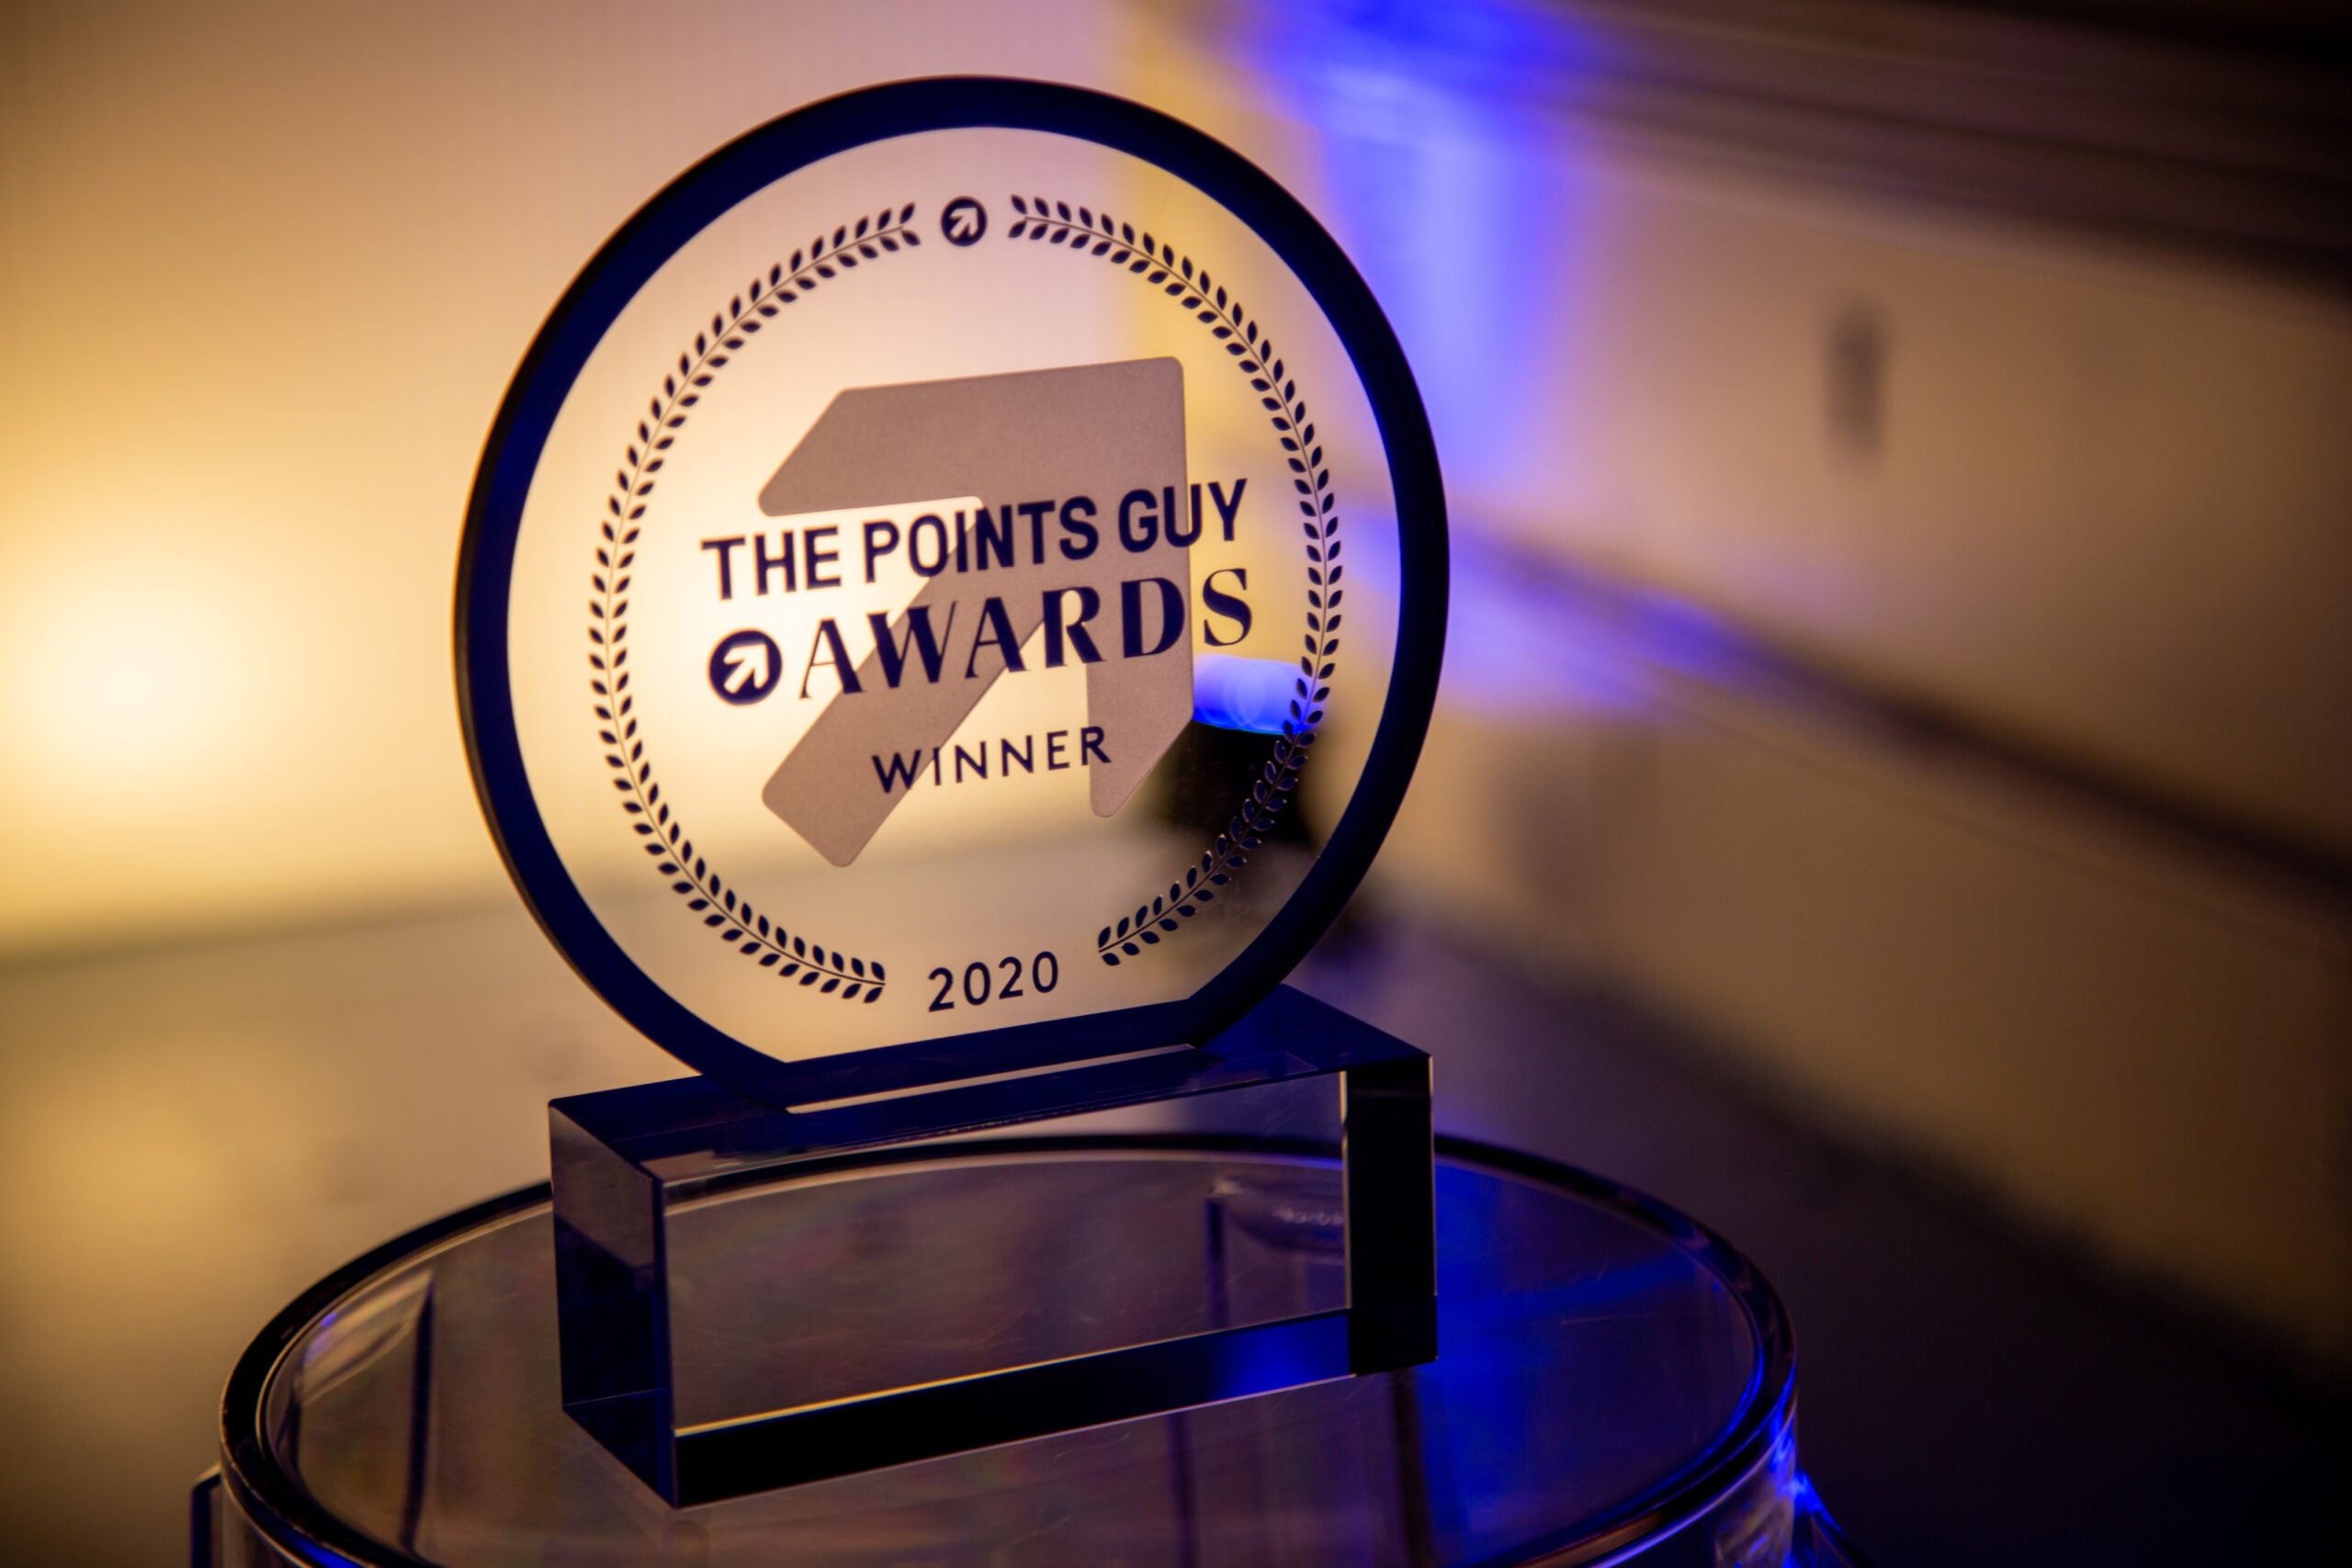 A trophy for the 2020 TPG Awards